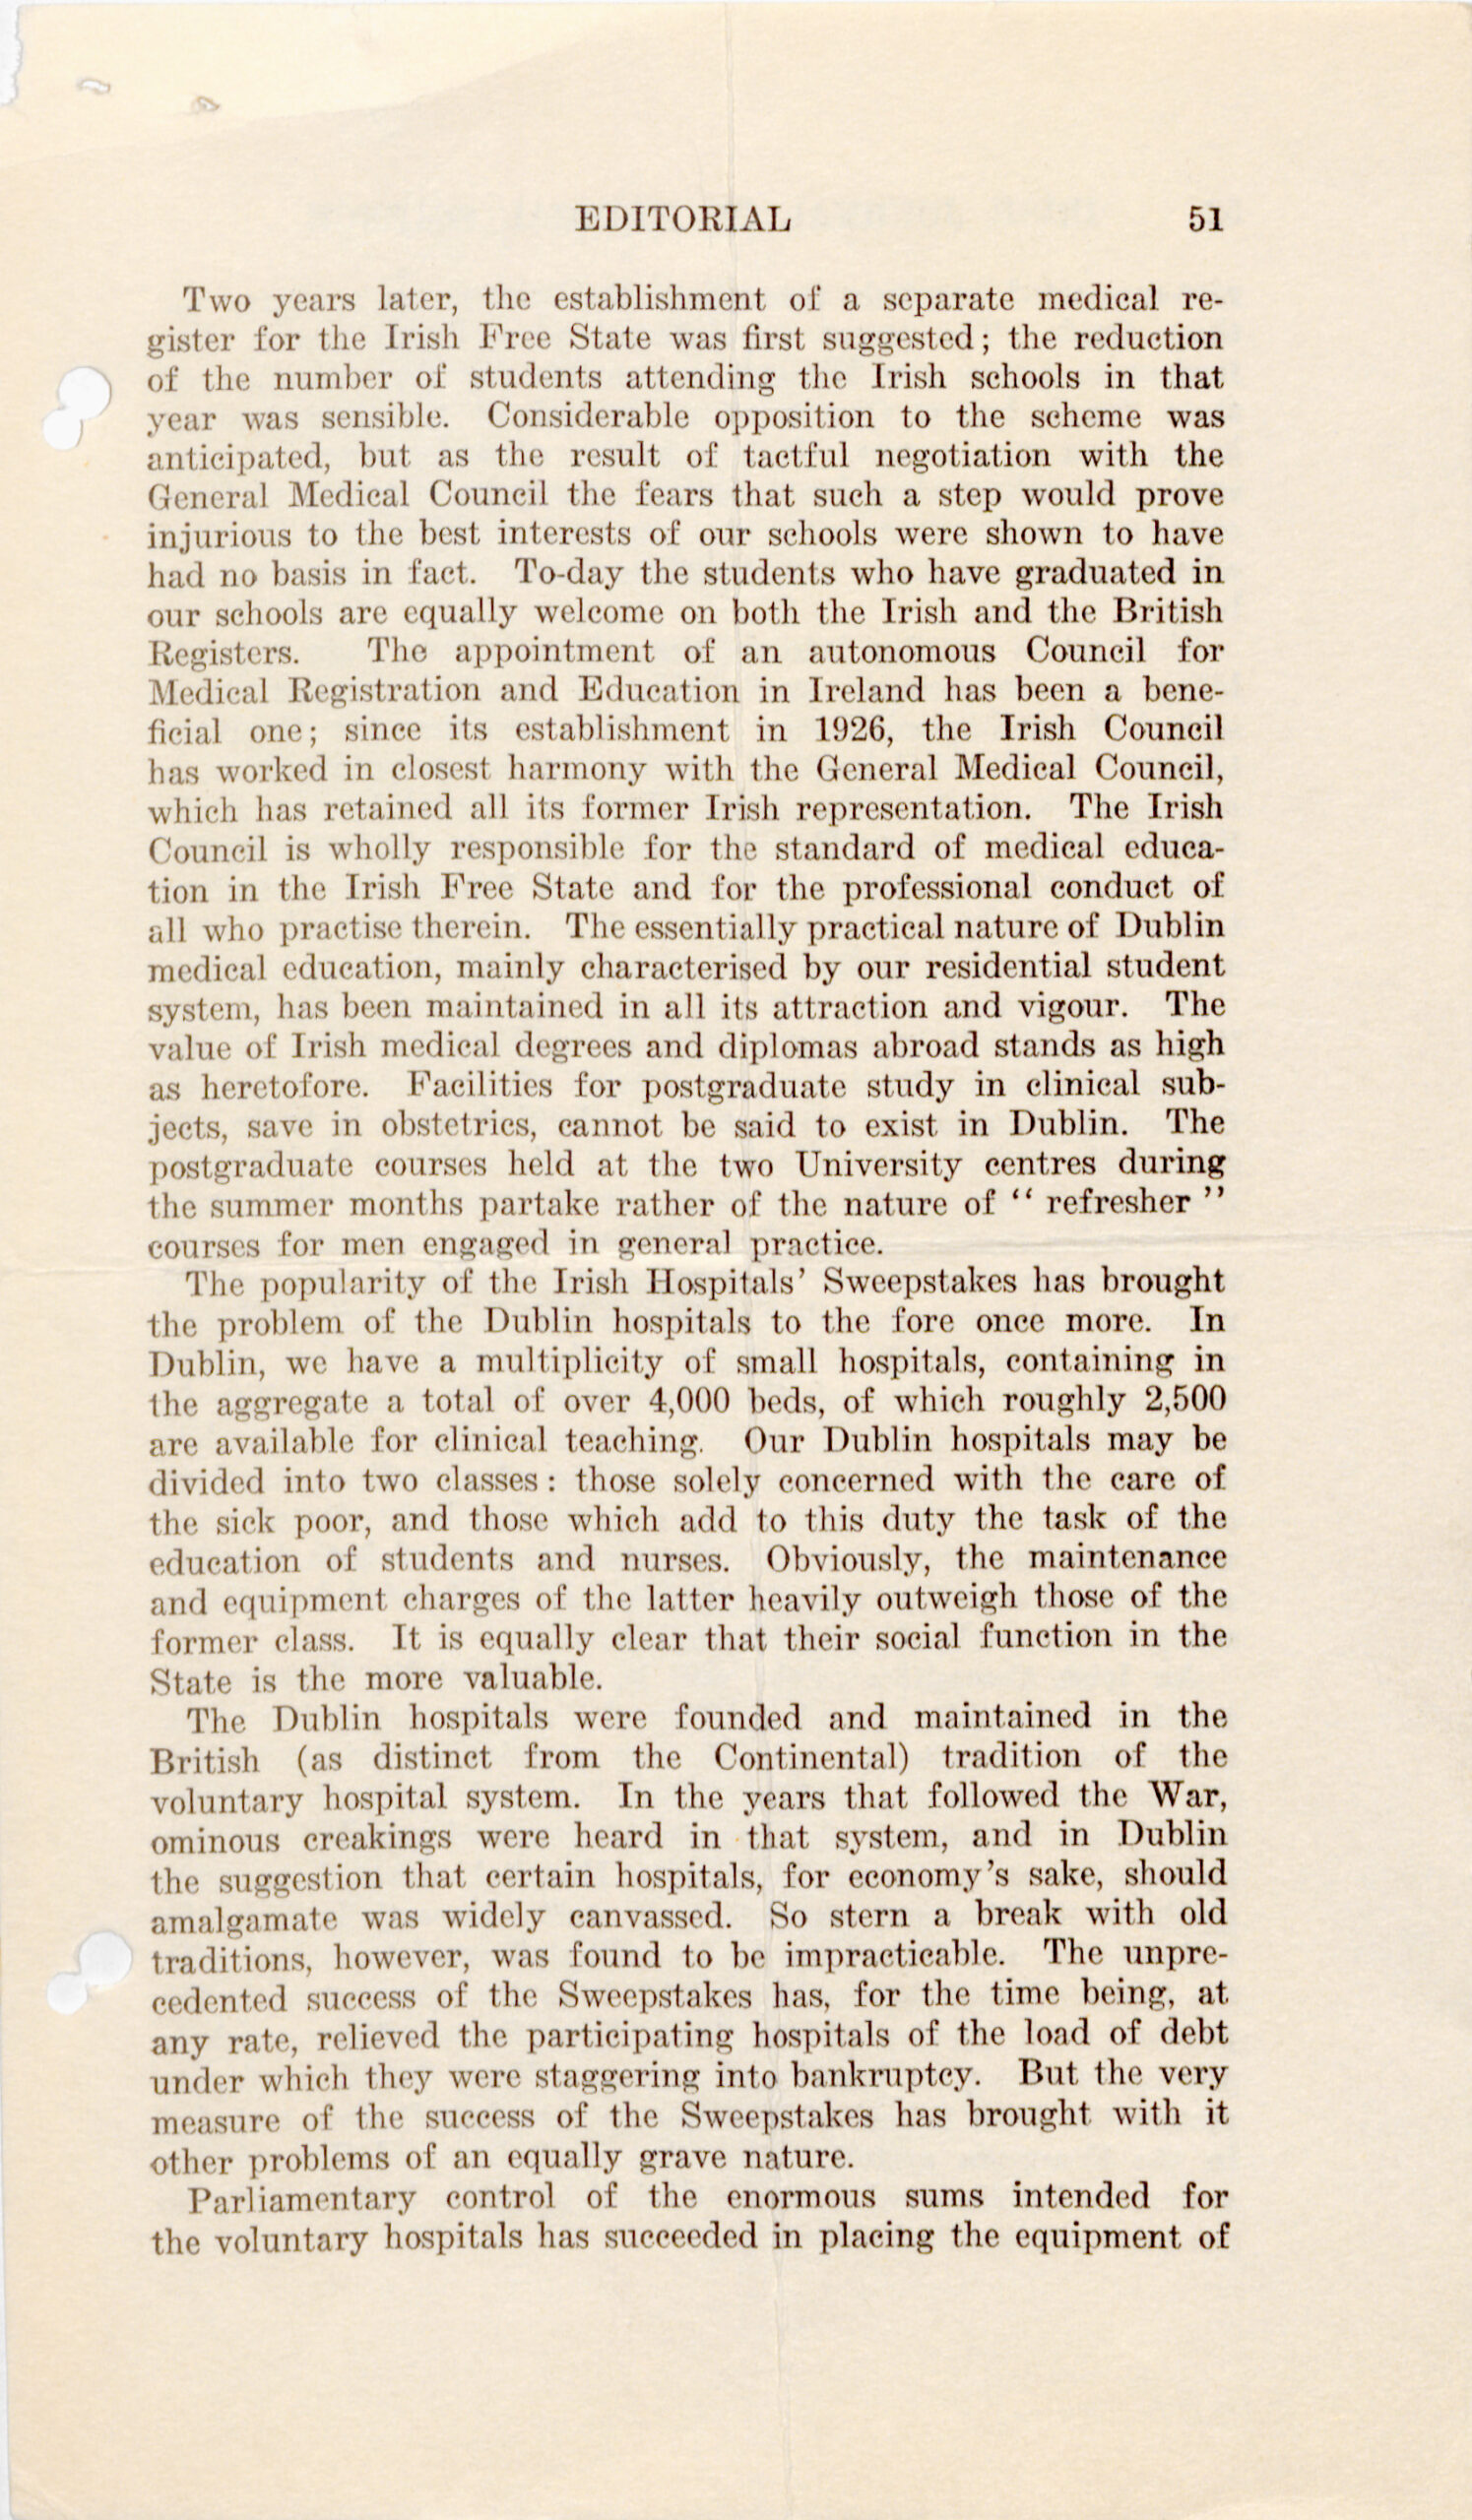 Series of documents from the Irish Journal of Medical Science, 1932. Page three of four.